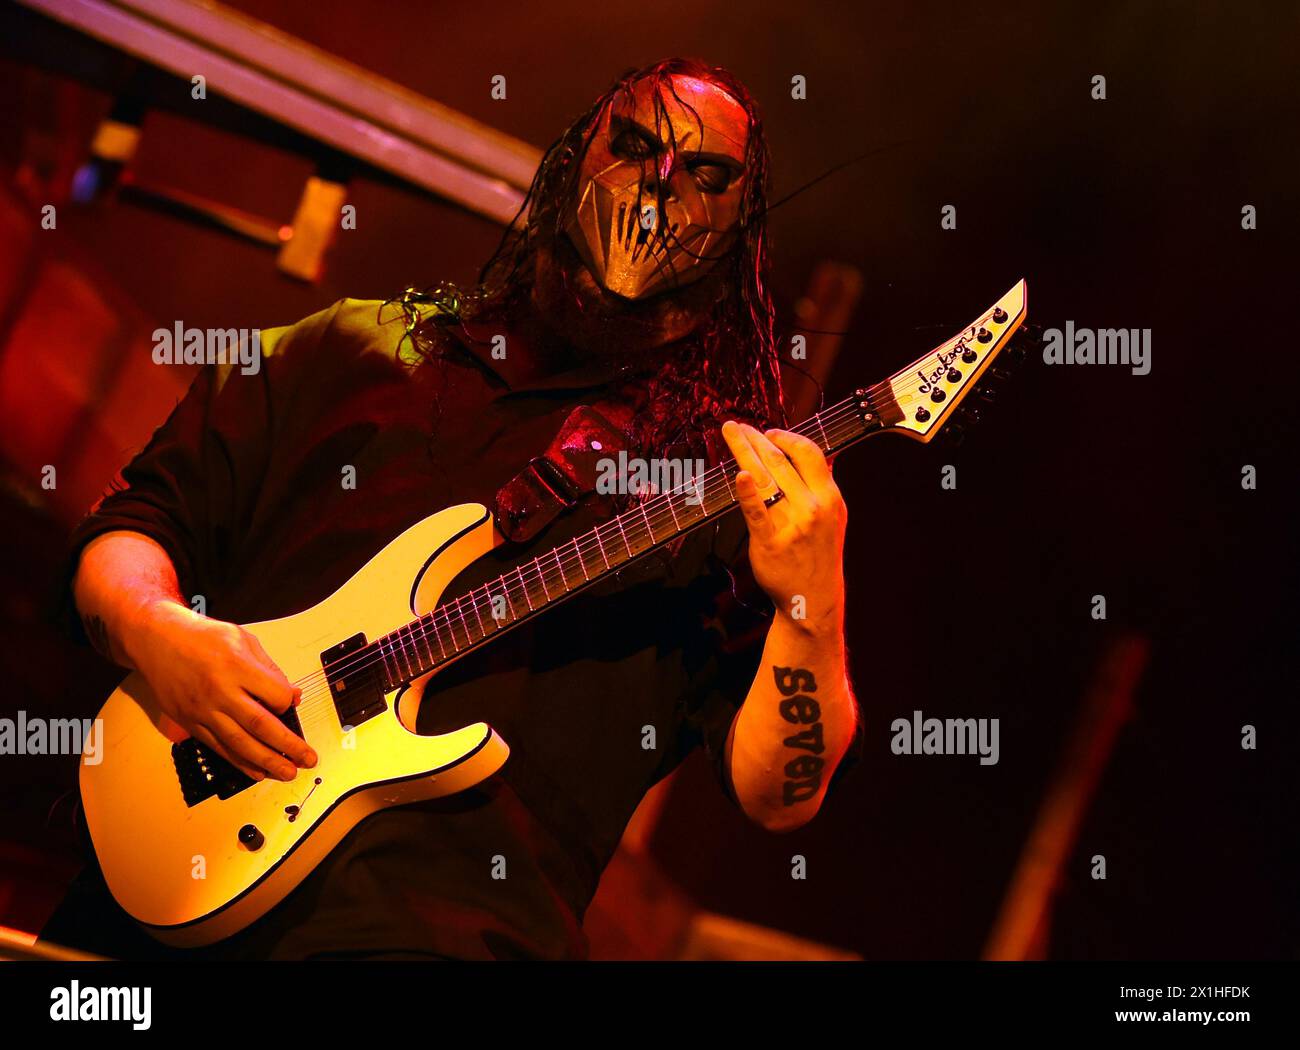 Guitaris Mick Thomson of the band 'Slipknot' during concert on 'XX Stage' during Nova Rock 2019 festival in Nickelsdorf, Austria, June 13 2019. The event runs from June 13 to 16, 2019. MANDATORY CREDIT + + + EDITORIAL USE ONLY + + + - 20190613 PD8503 - Rechteinfo: Rights Managed (RM) Nur für redaktionelle Nutzung! Stock Photo